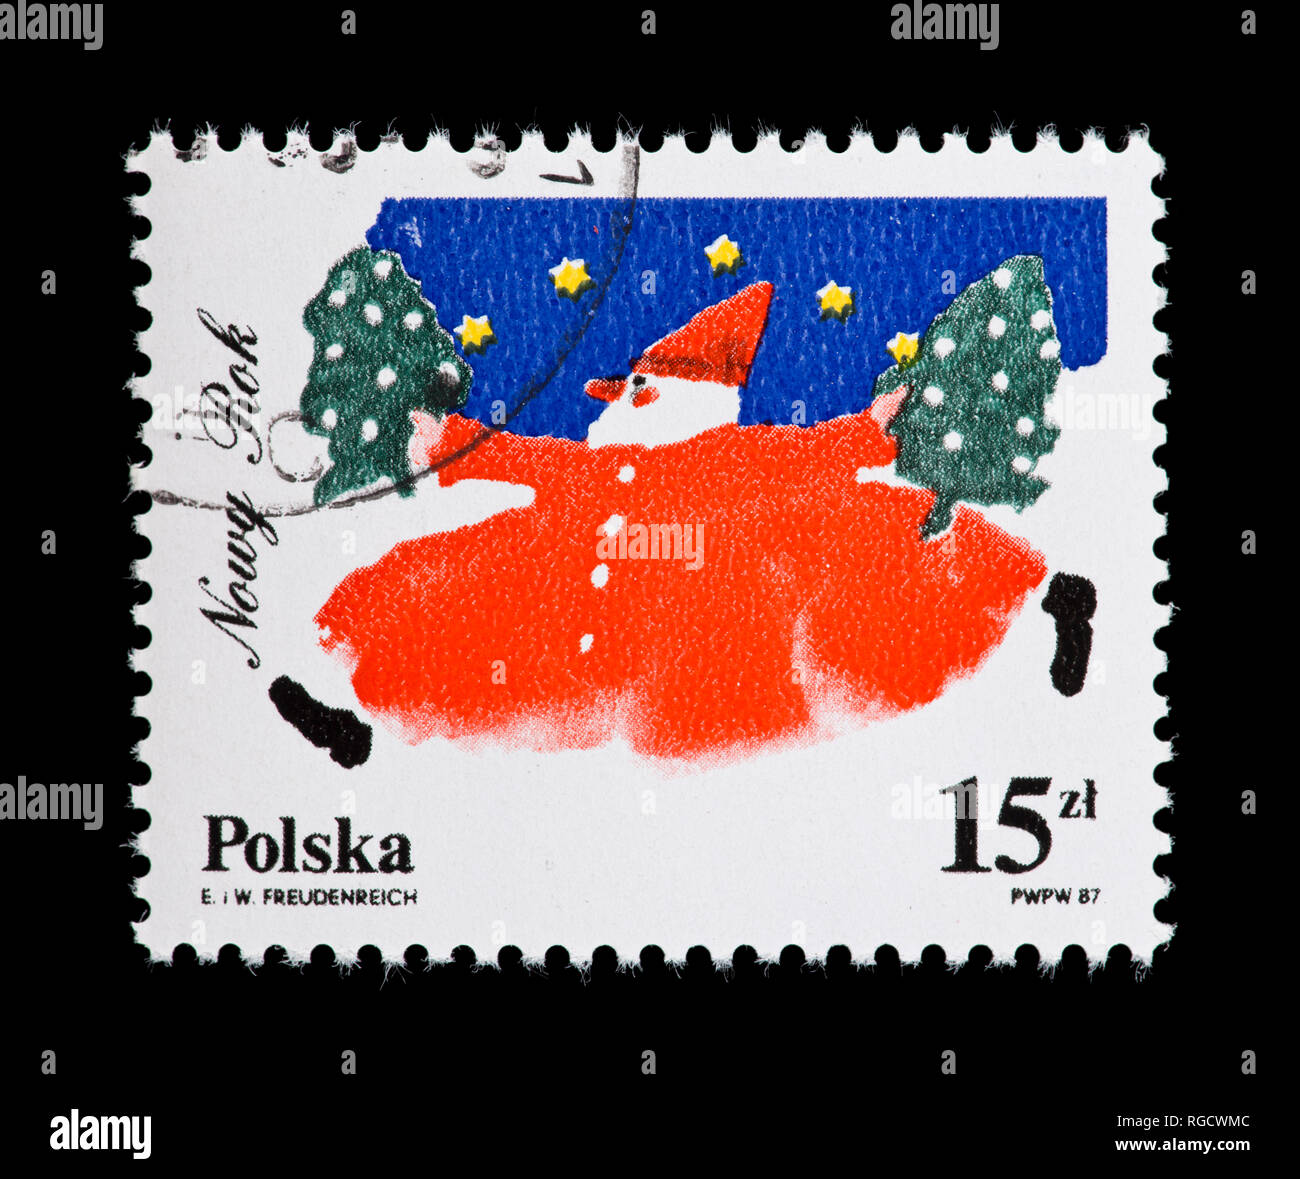 Postage stamp from Poland depicting a man in a red suit, issued for New Year's Day Stock Photo